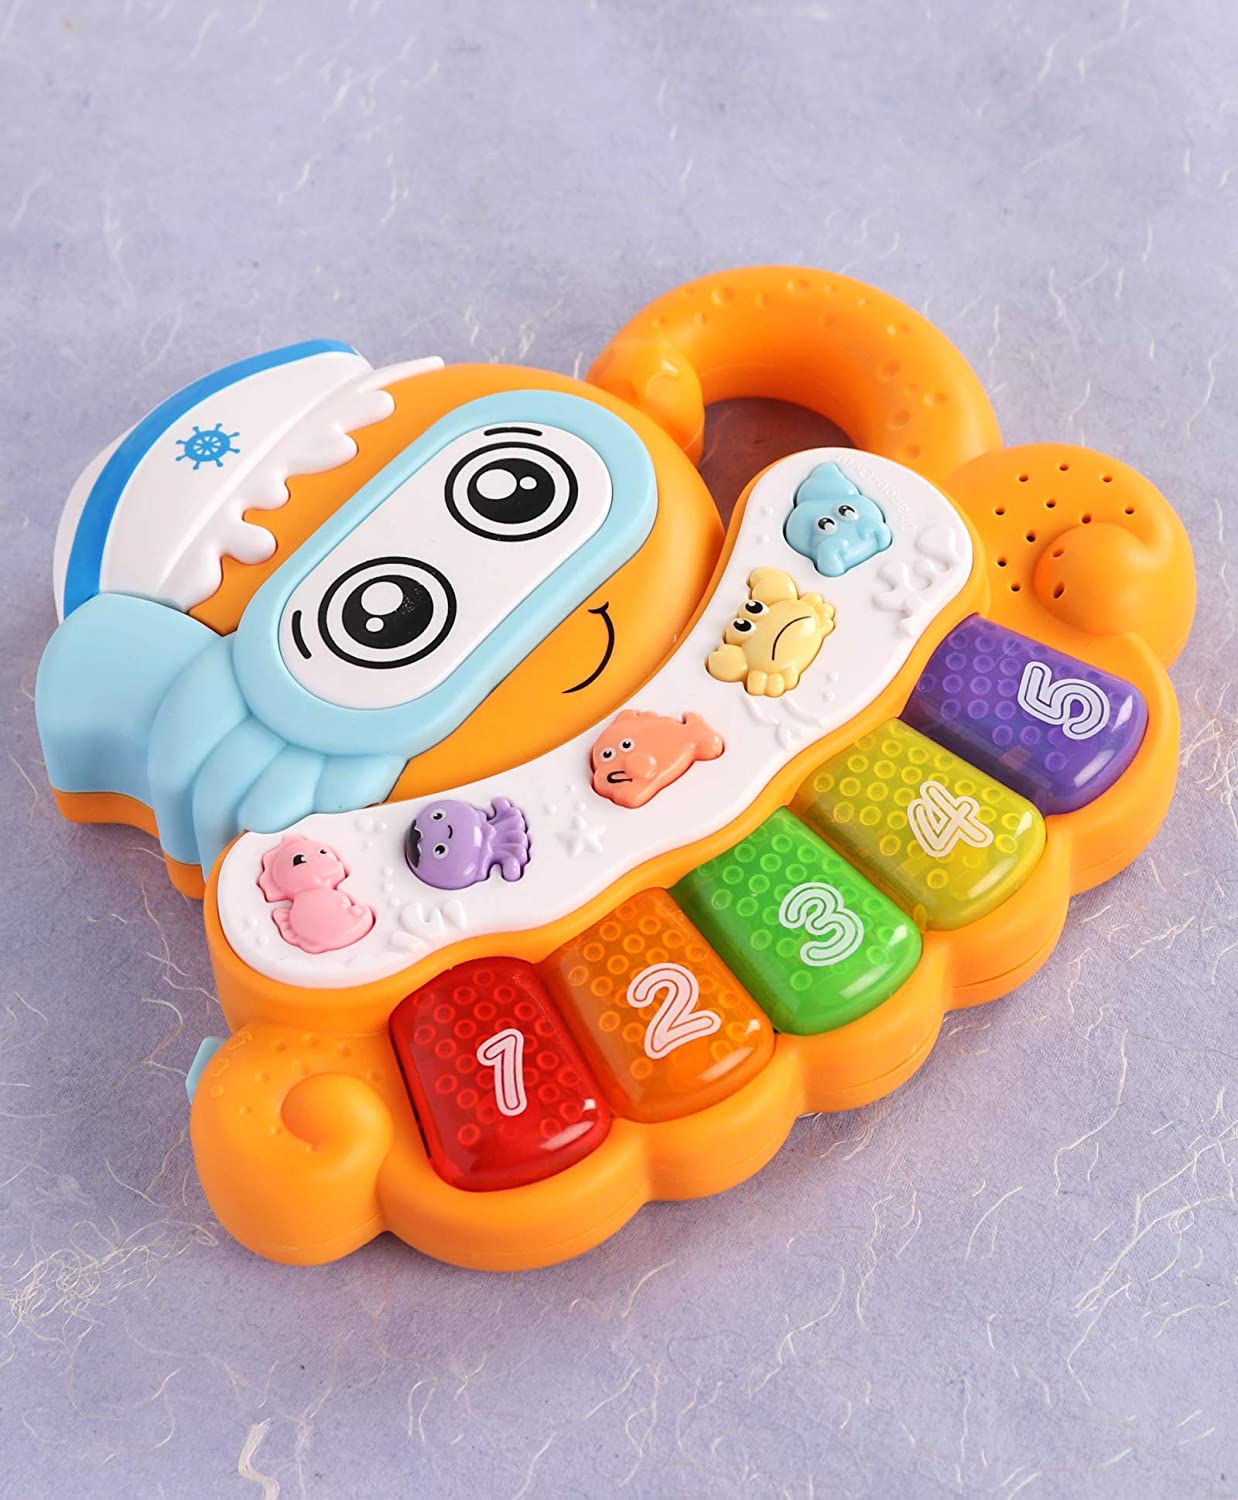 Multi-Function Octopus Piano Toy